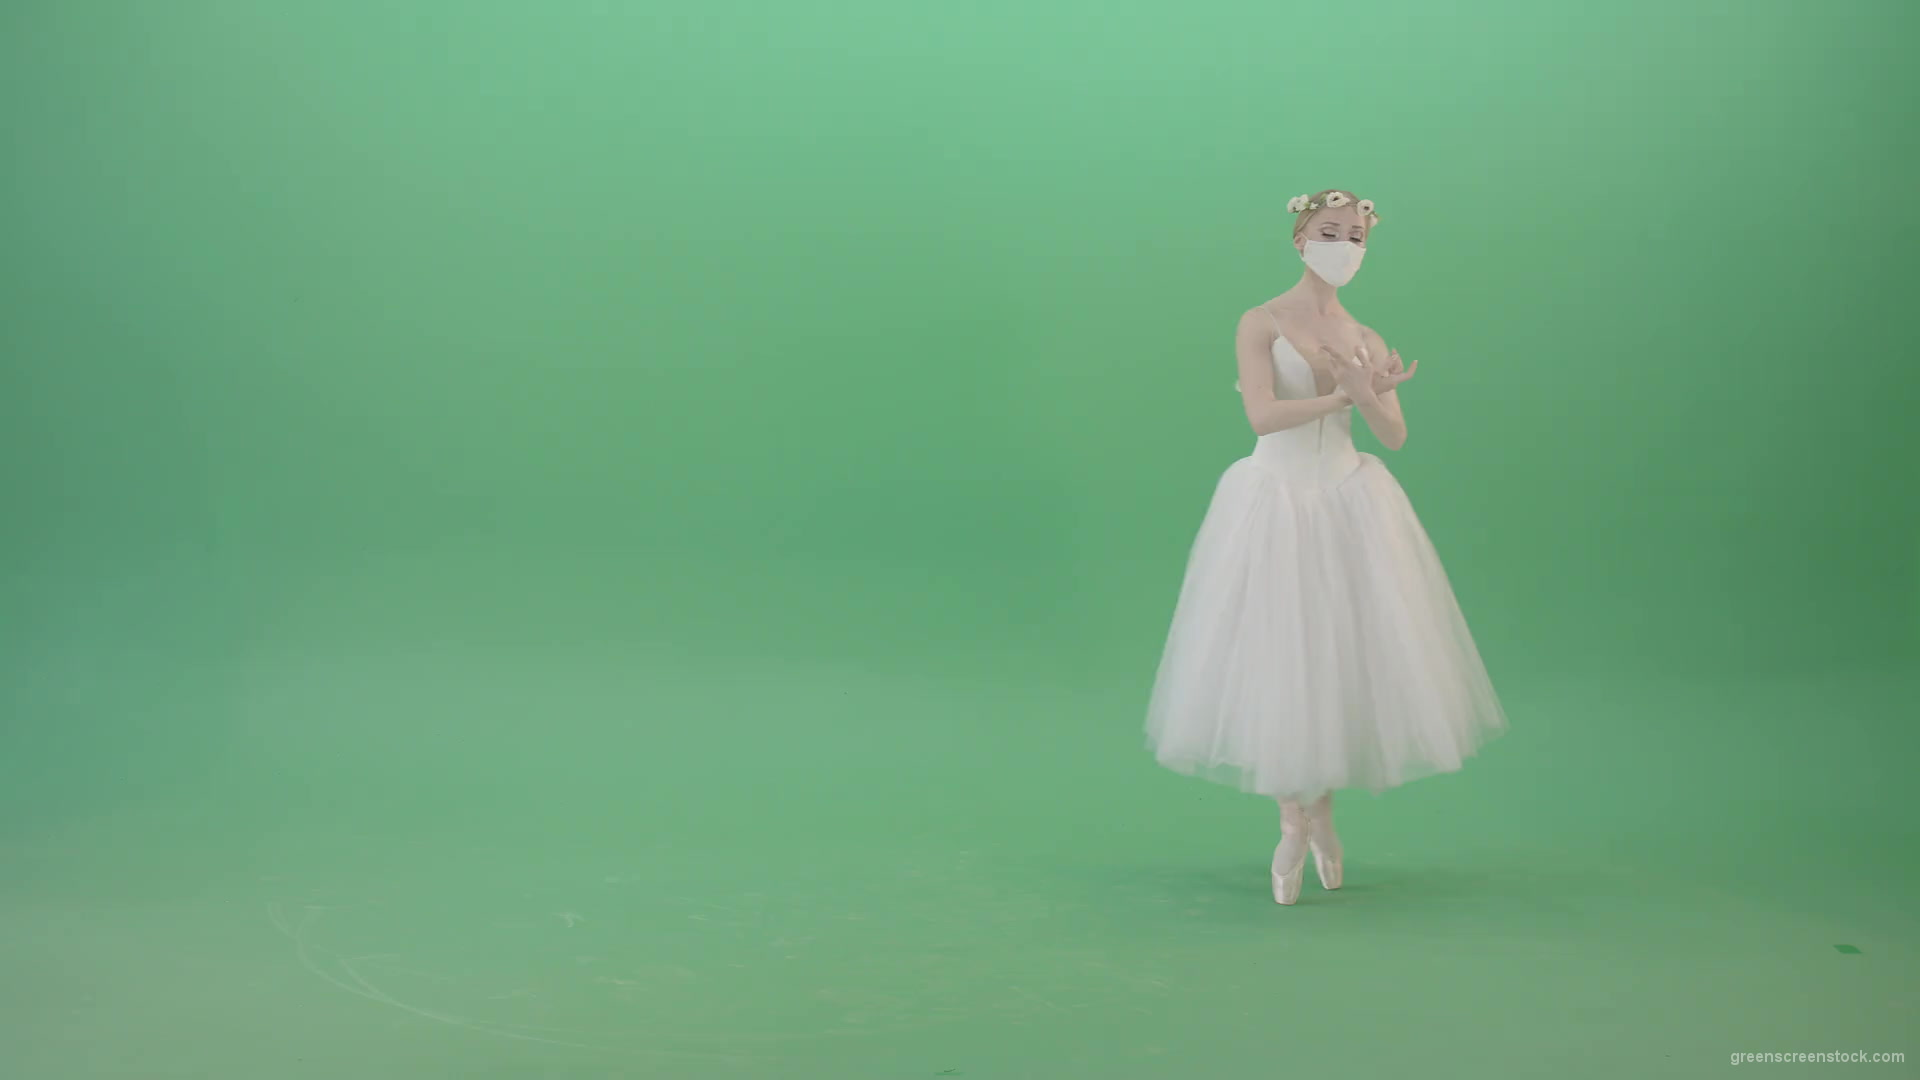 Ballet-Dance-young-woman-welcome-Corona-Virus-dancing-in-mask-isolated-on-green-screen-4K-Video-Footage-1920_001 Green Screen Stock